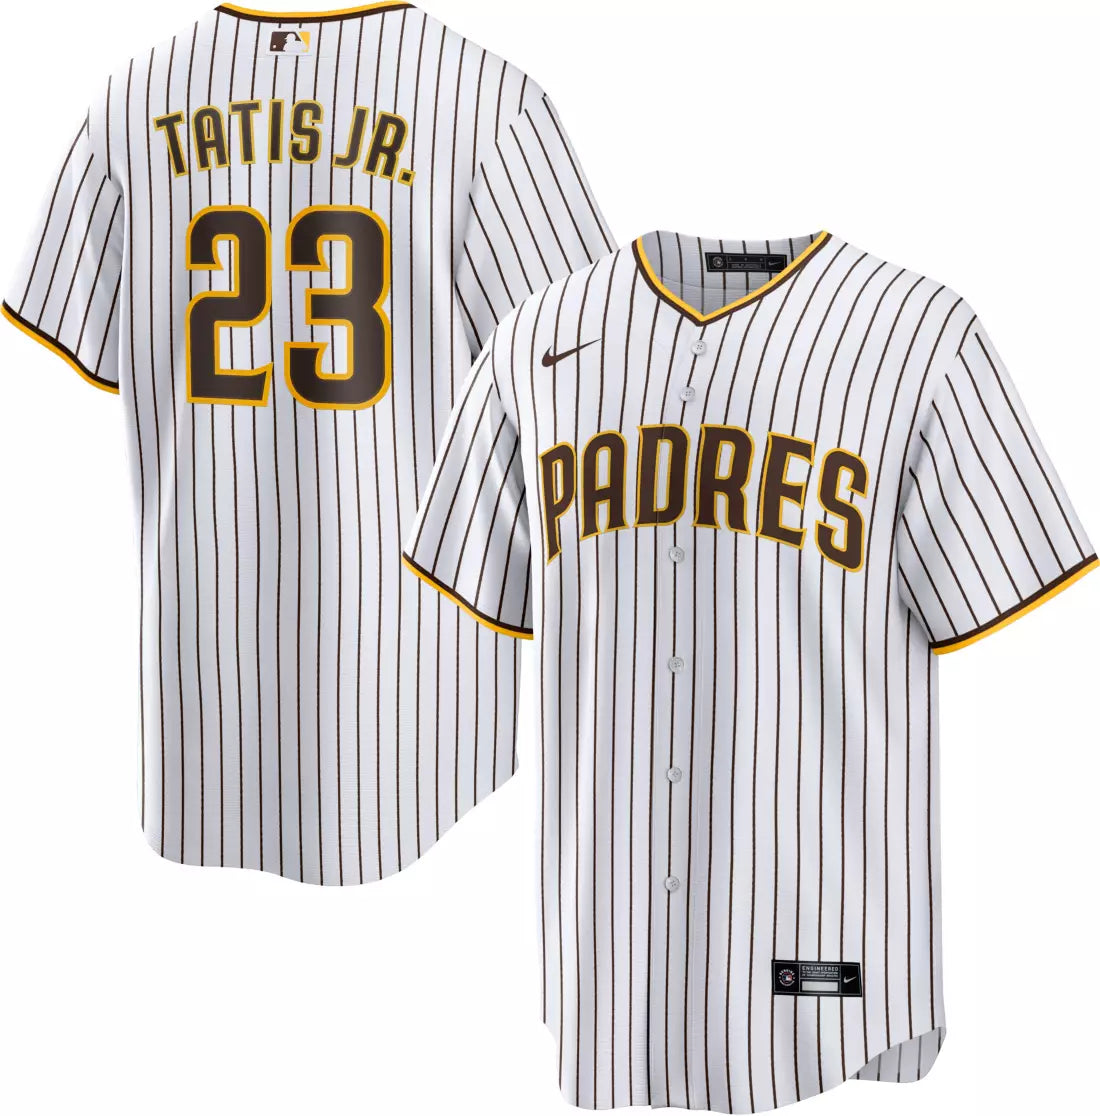 diego padres jersey brown